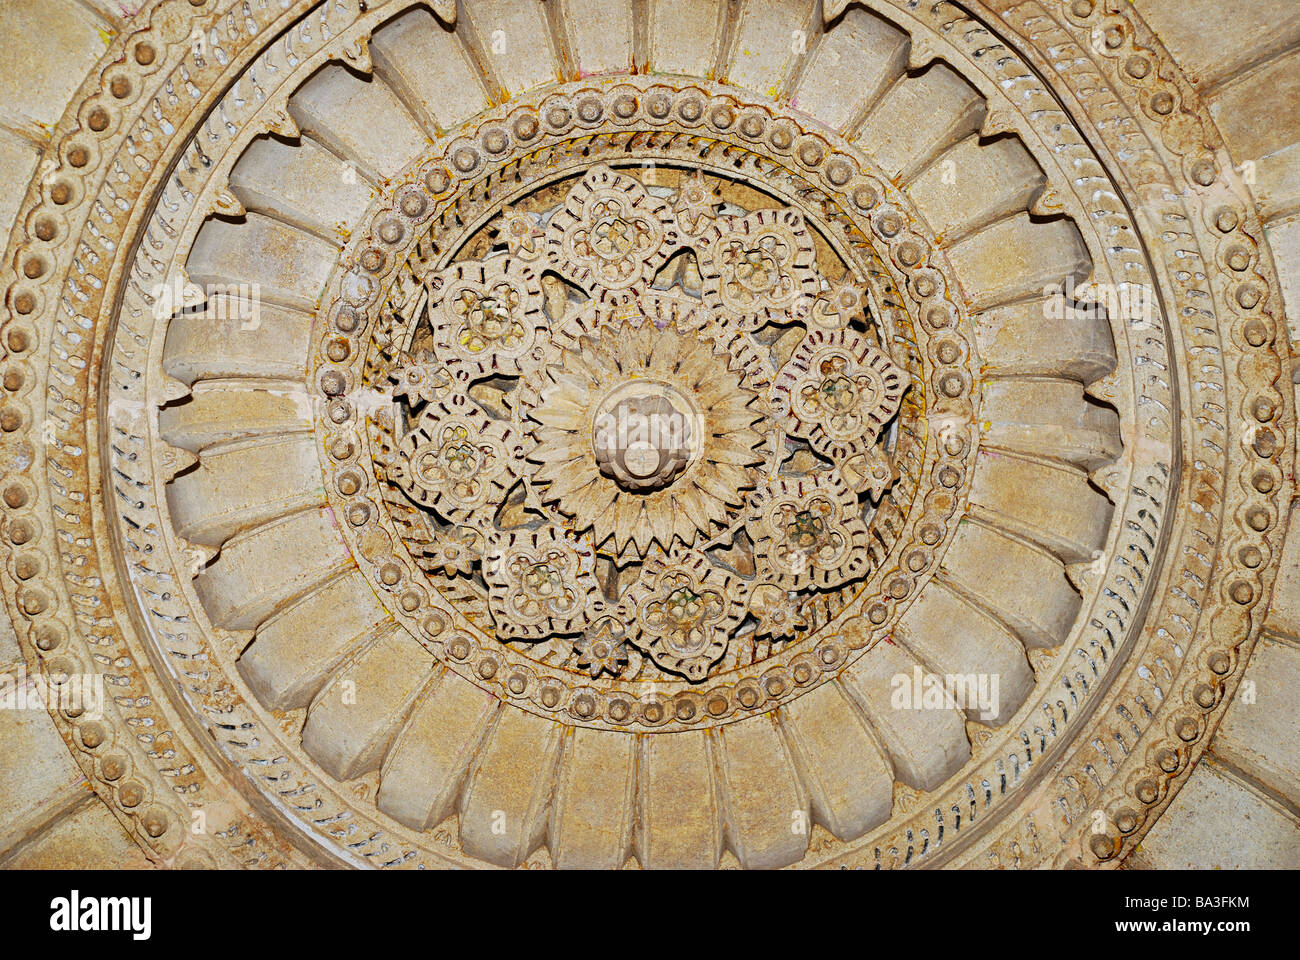 Incredible stone carving on dome of Jain temple, Jaisalmer Fort, Rajasthan State, India. Stock Photo